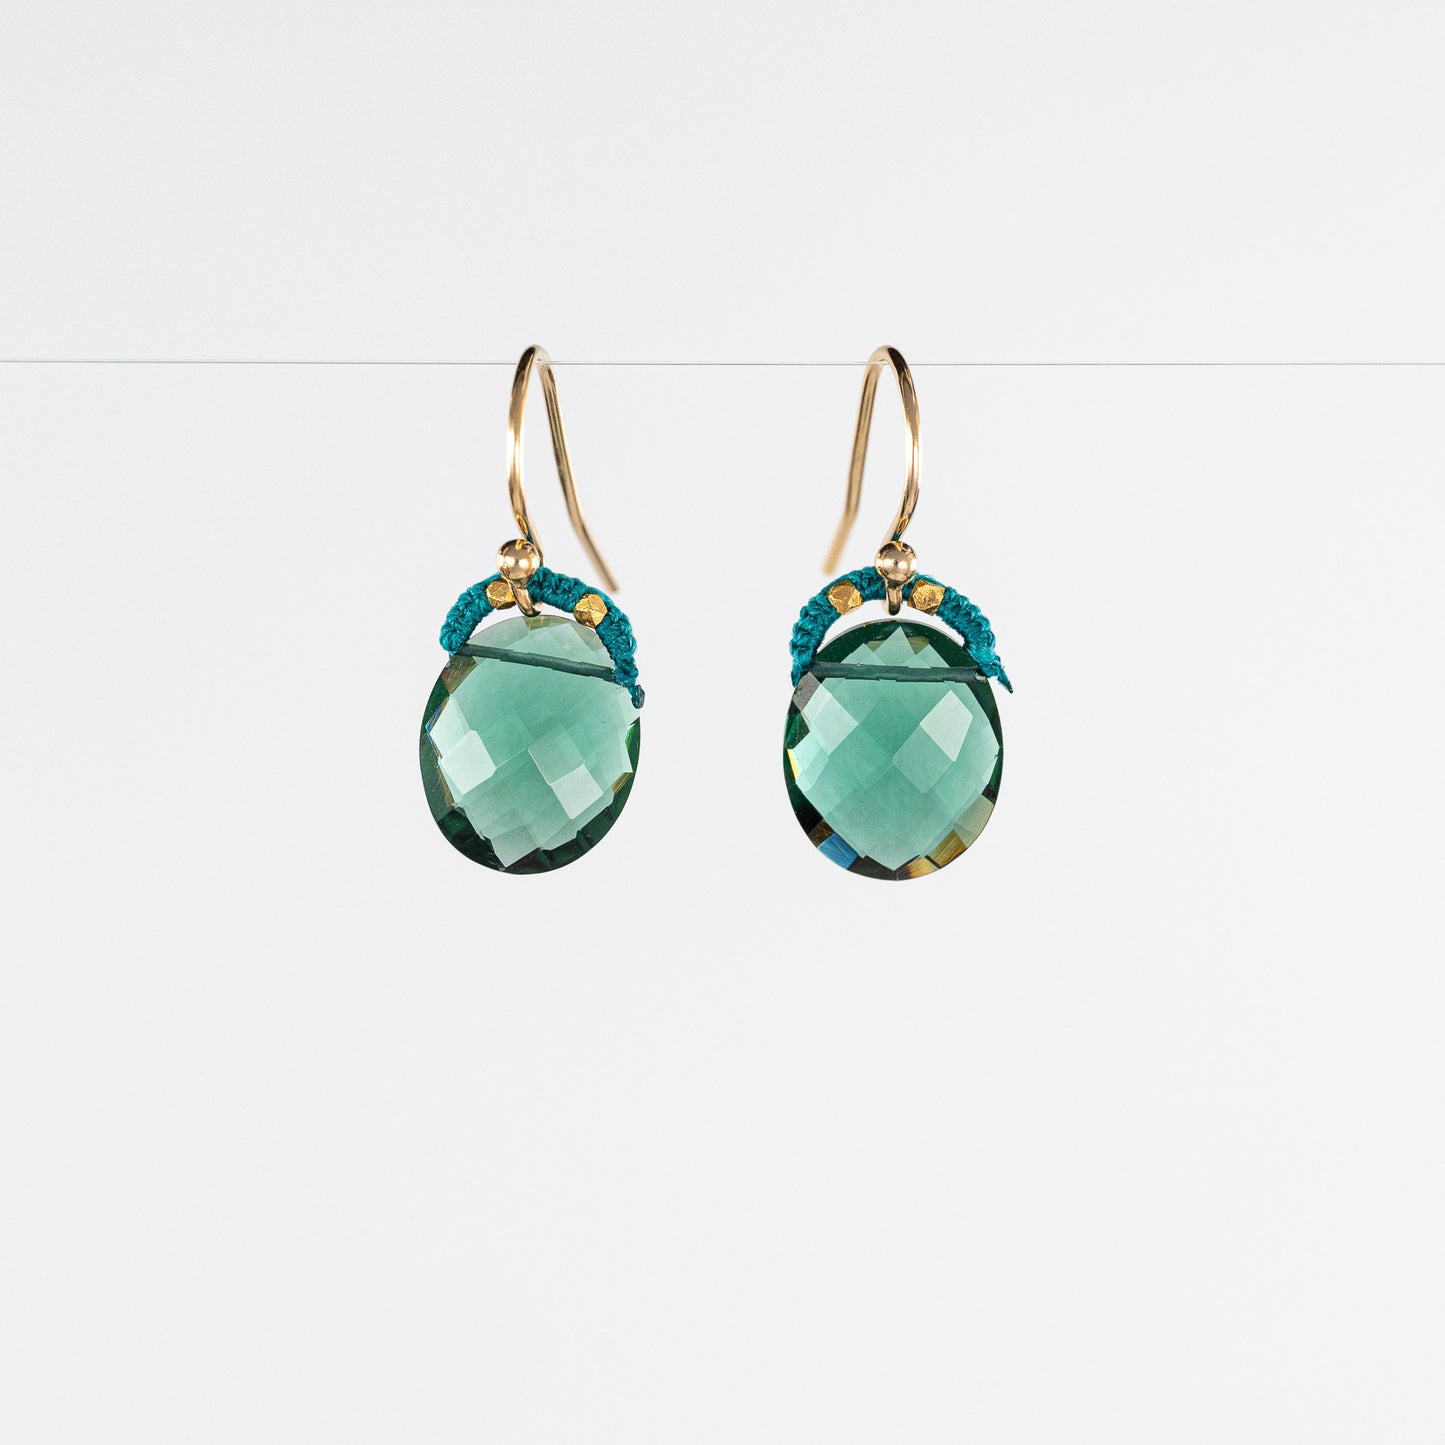 Load image into Gallery viewer, Danielle Welmond Petite Indicolite Oval Drop Earrings with Coordinating Teal Silk
